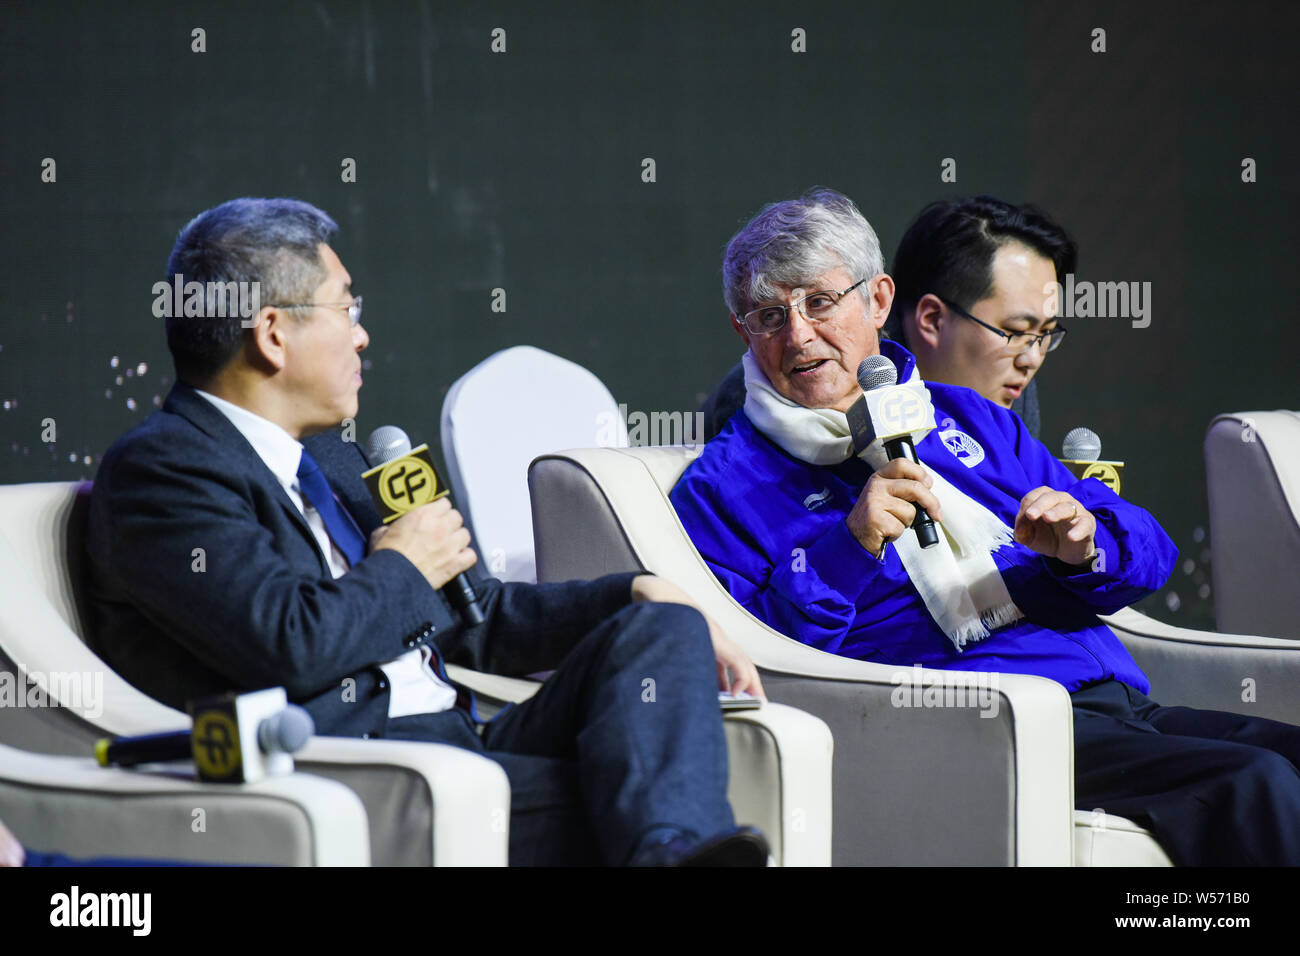 Serbian football coach and former player Bora Milutinovic, right, attends the Chinese Football And Esports Forum during the 2018 Chinese Footballer of Stock Photo